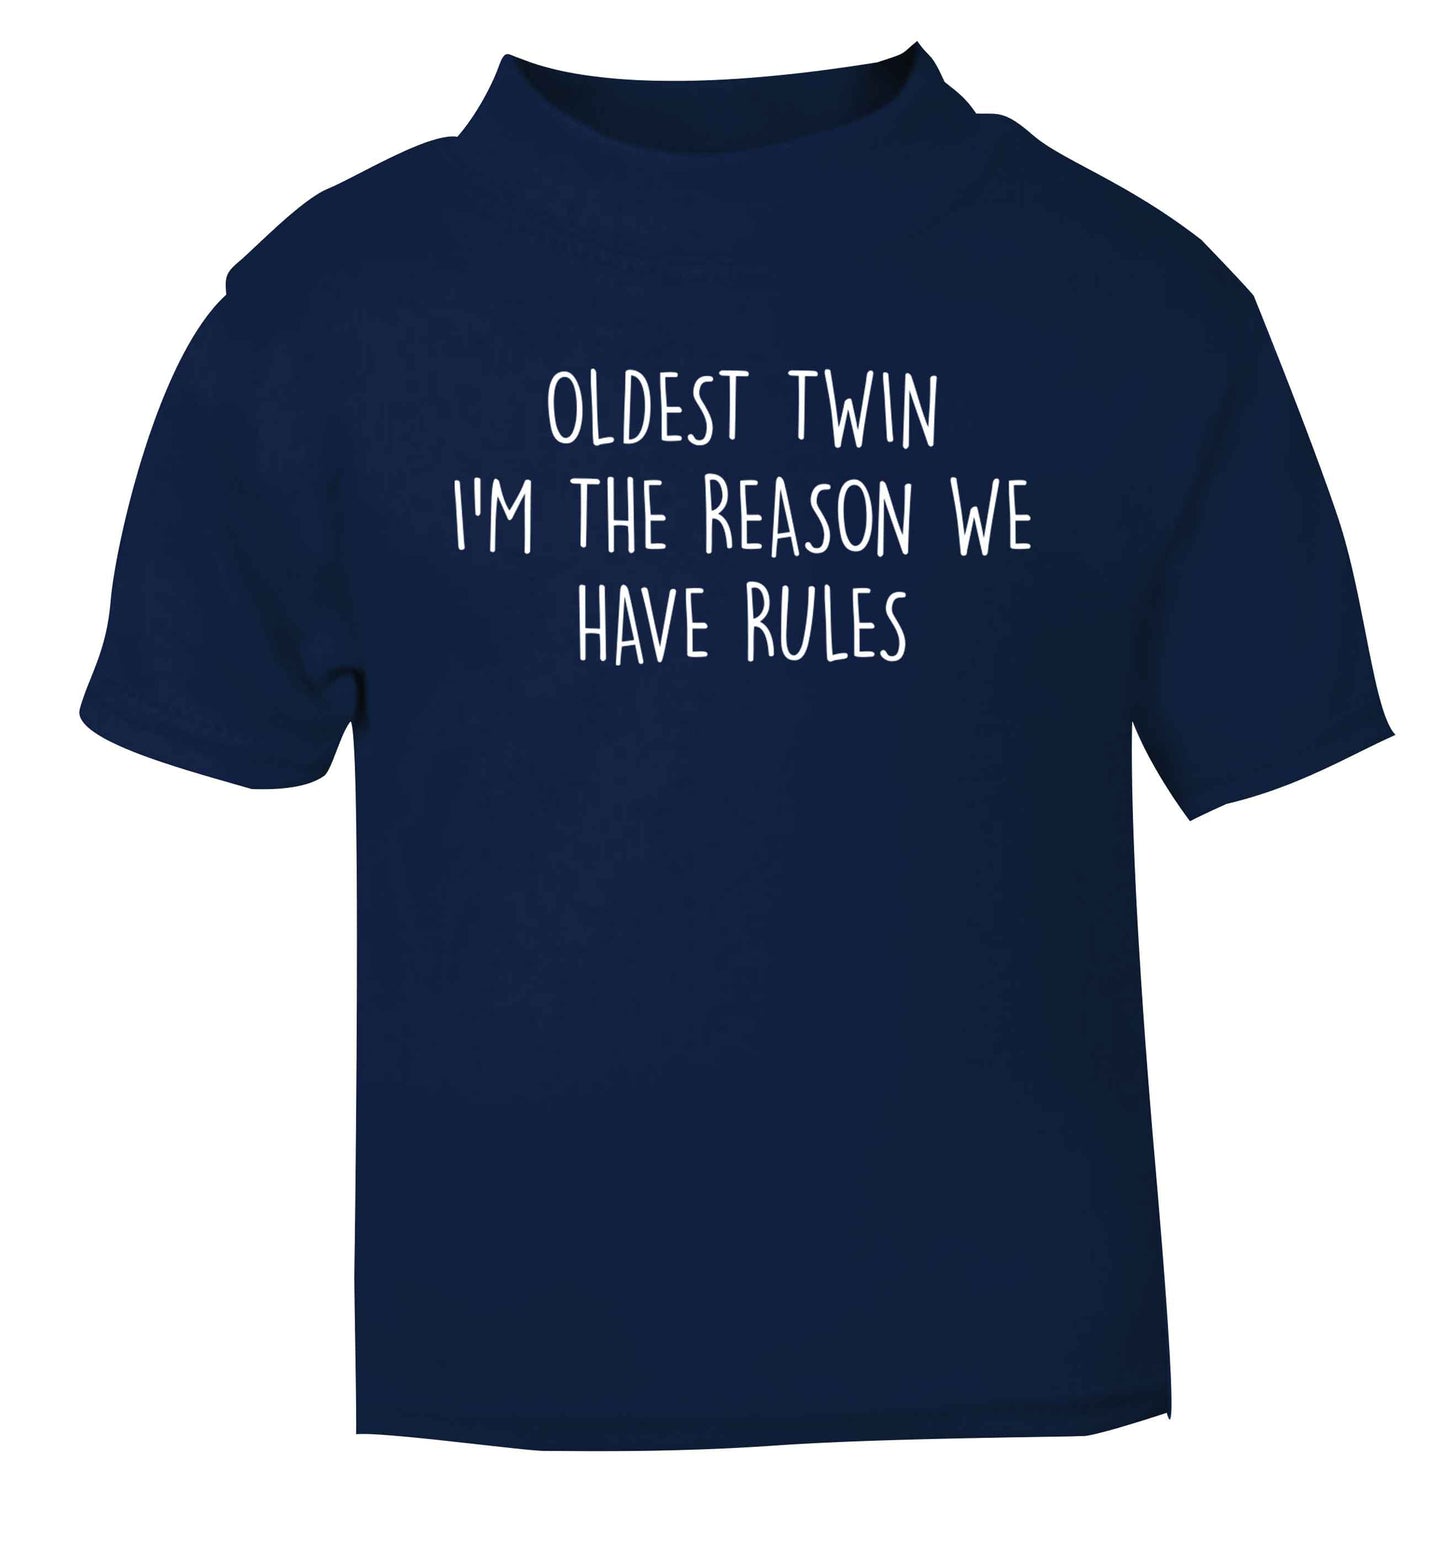 Oldest twin I'm the reason we have rules navy baby toddler Tshirt 2 Years